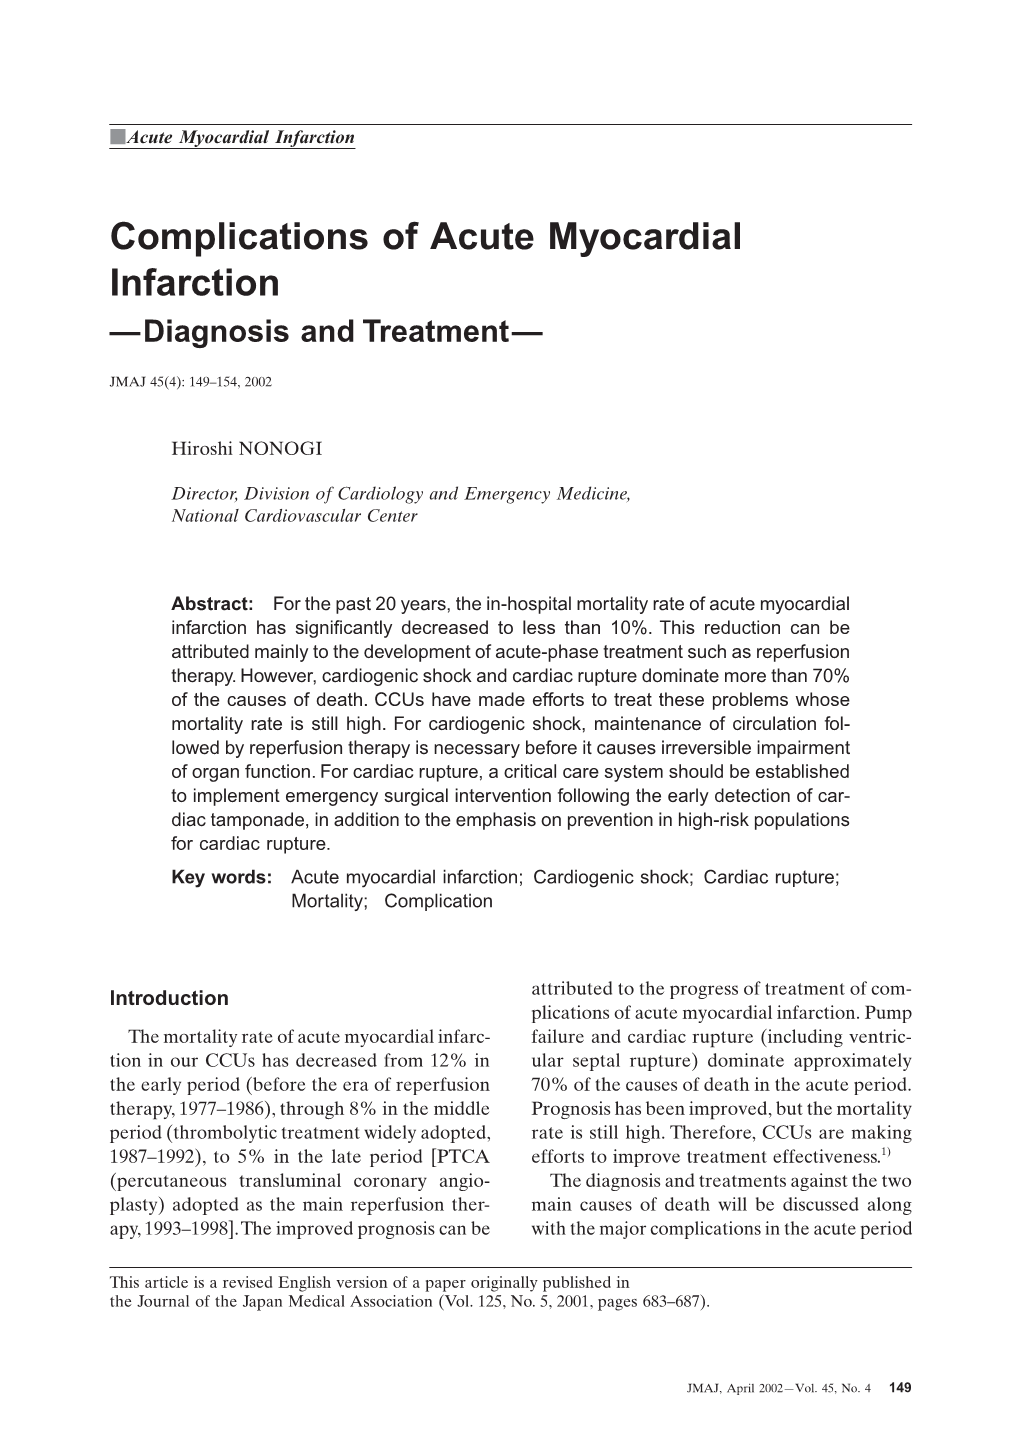 Complications of Acute Myocardial Infarction —Diagnosis and Treatment—